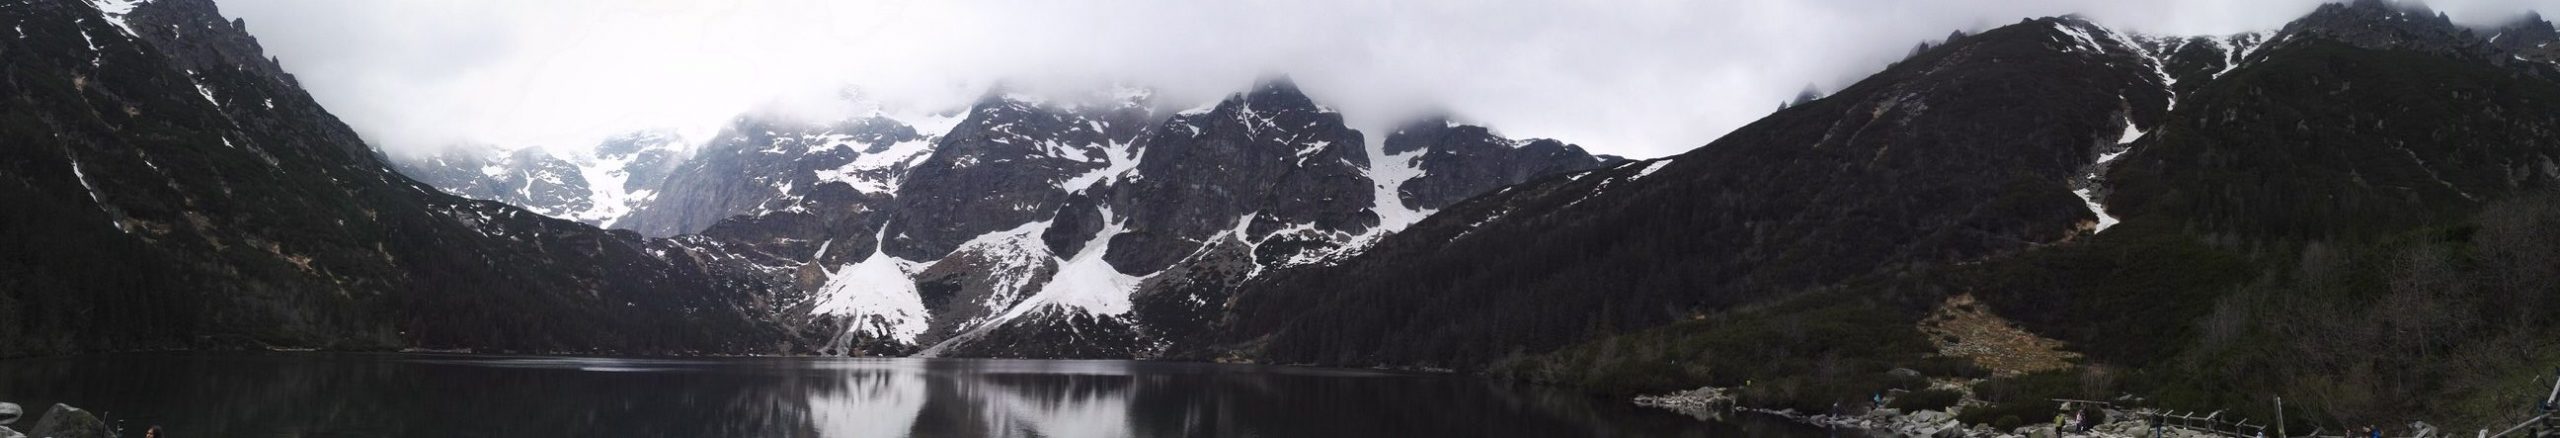 Spring, summer, autumn and winter of Morskie Oko